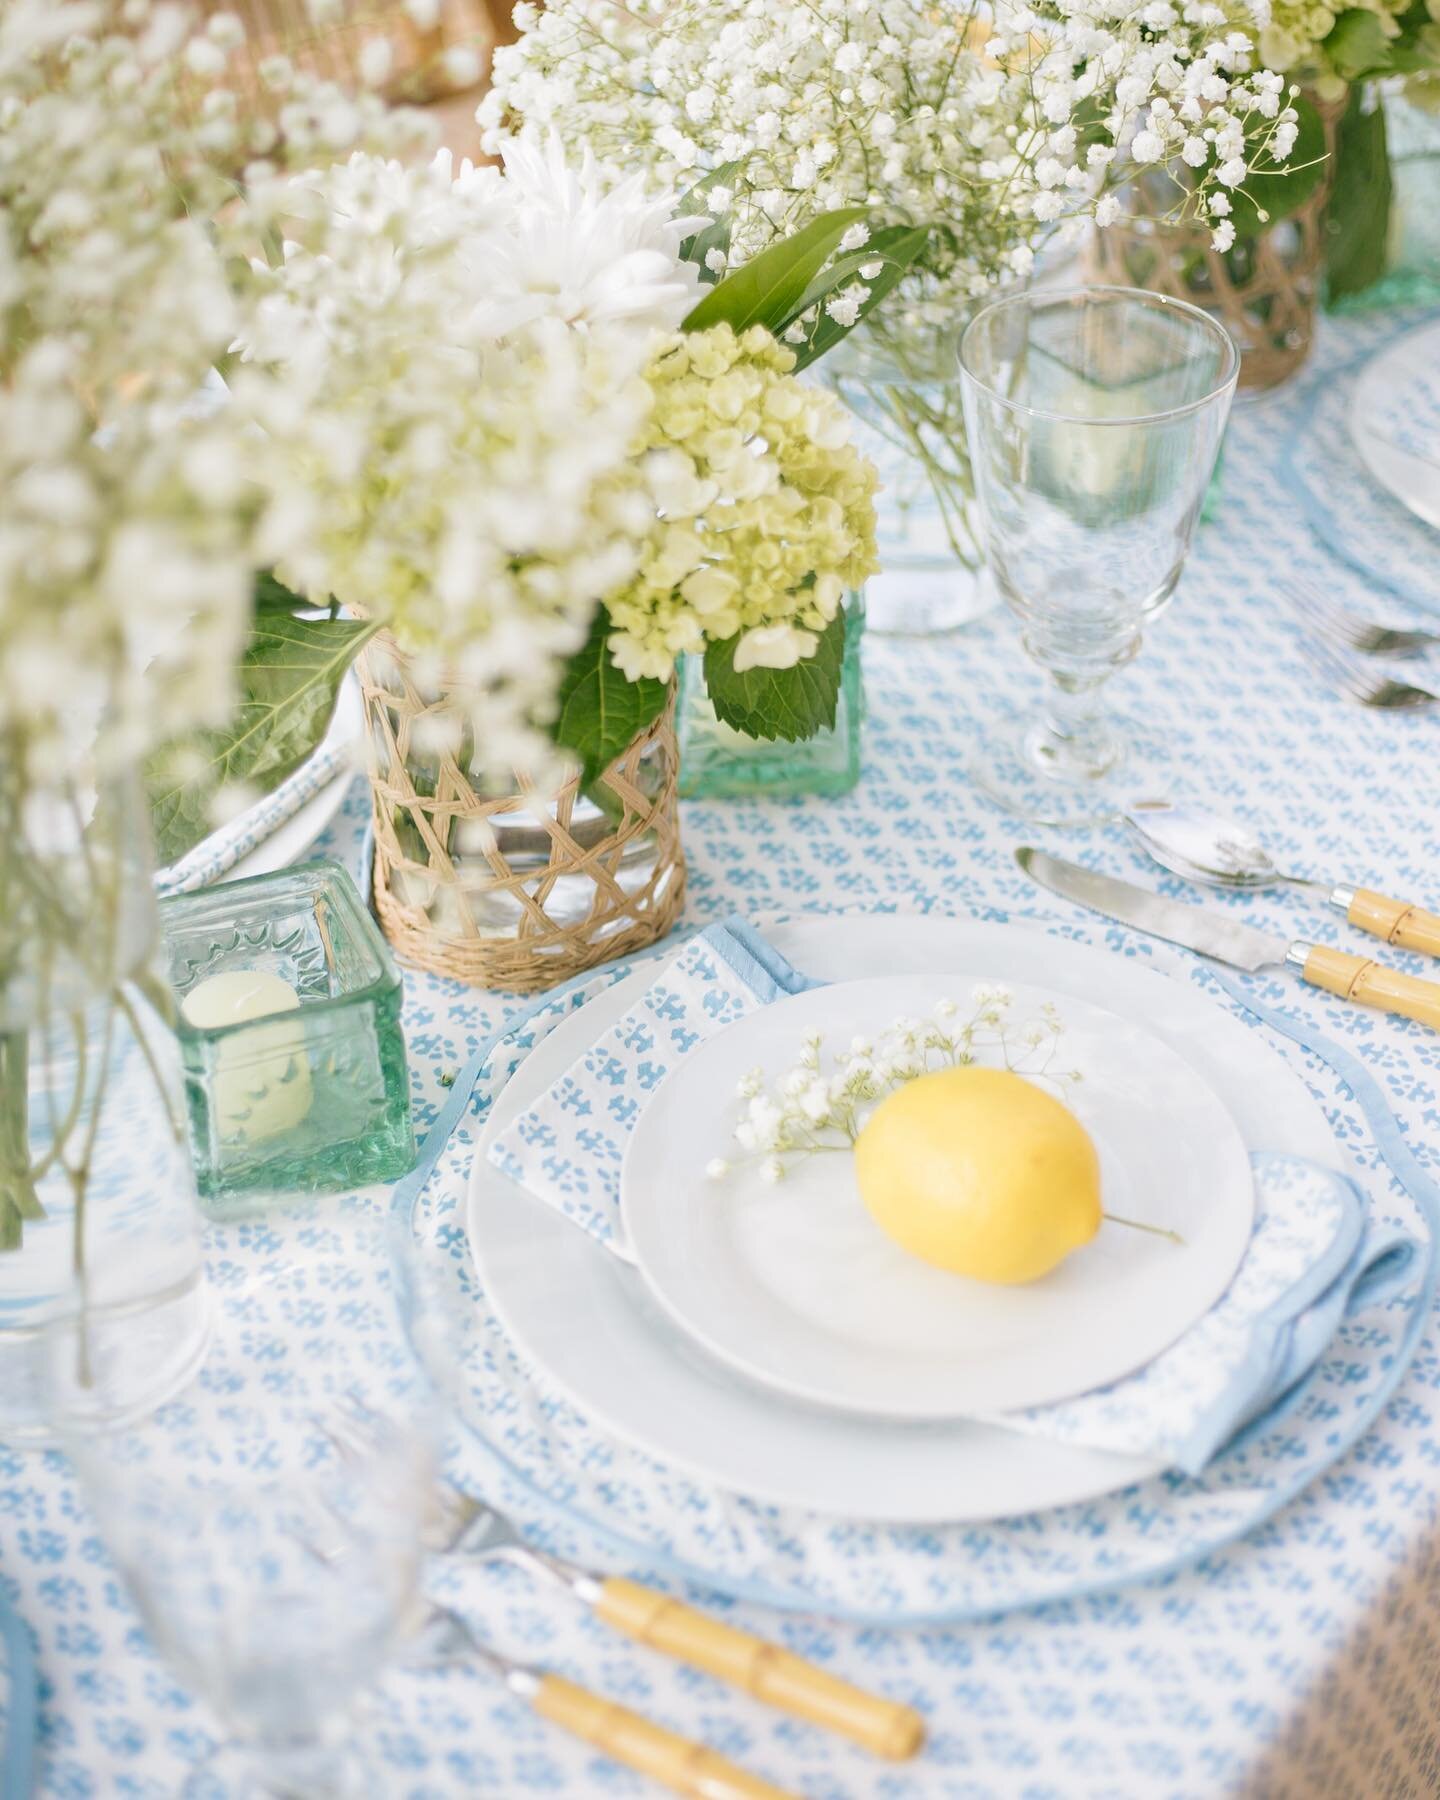 a few more pics from this blue and white summer table 💙 if you&rsquo;re looking for pretty, colorful, and unique table decor finds, @lindrothdesign and @shoptheavenue are two of the best! // linked all the table decor in the @shop.ltk app ✨ head ove